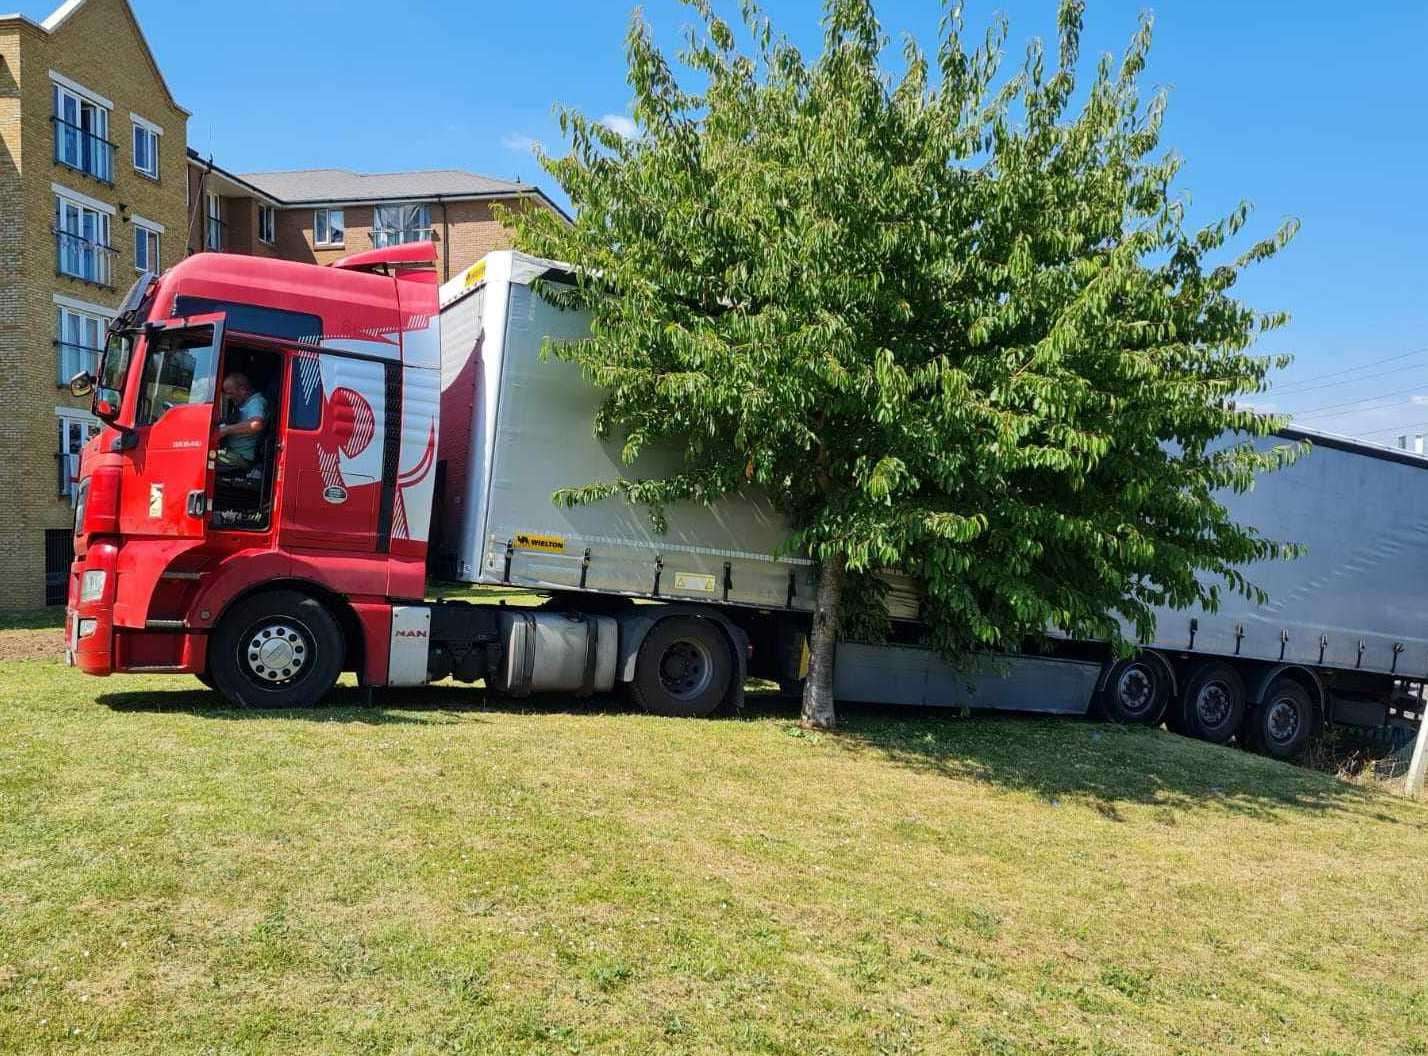 The large HGV got 'lost' after its driver allegedly misread a diversion sign